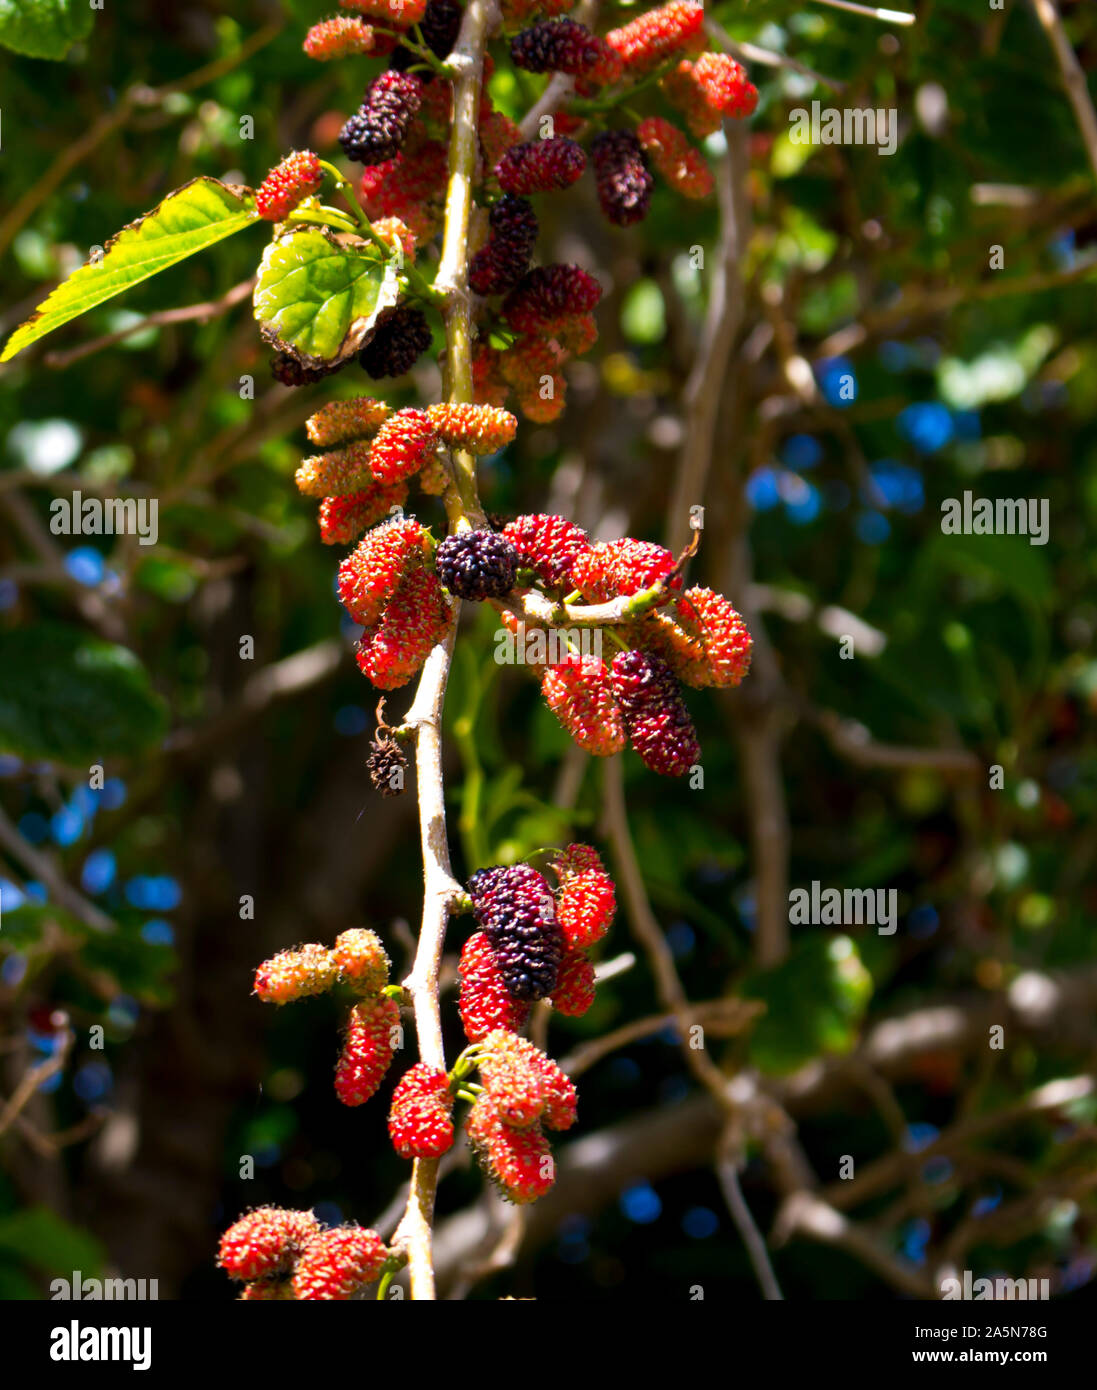 Morus alba Pendula  Weeping Mulberry Tree  a beautiful small tree with long pendulous branches which sweep towards the ground and produce sweet fruit. Stock Photo